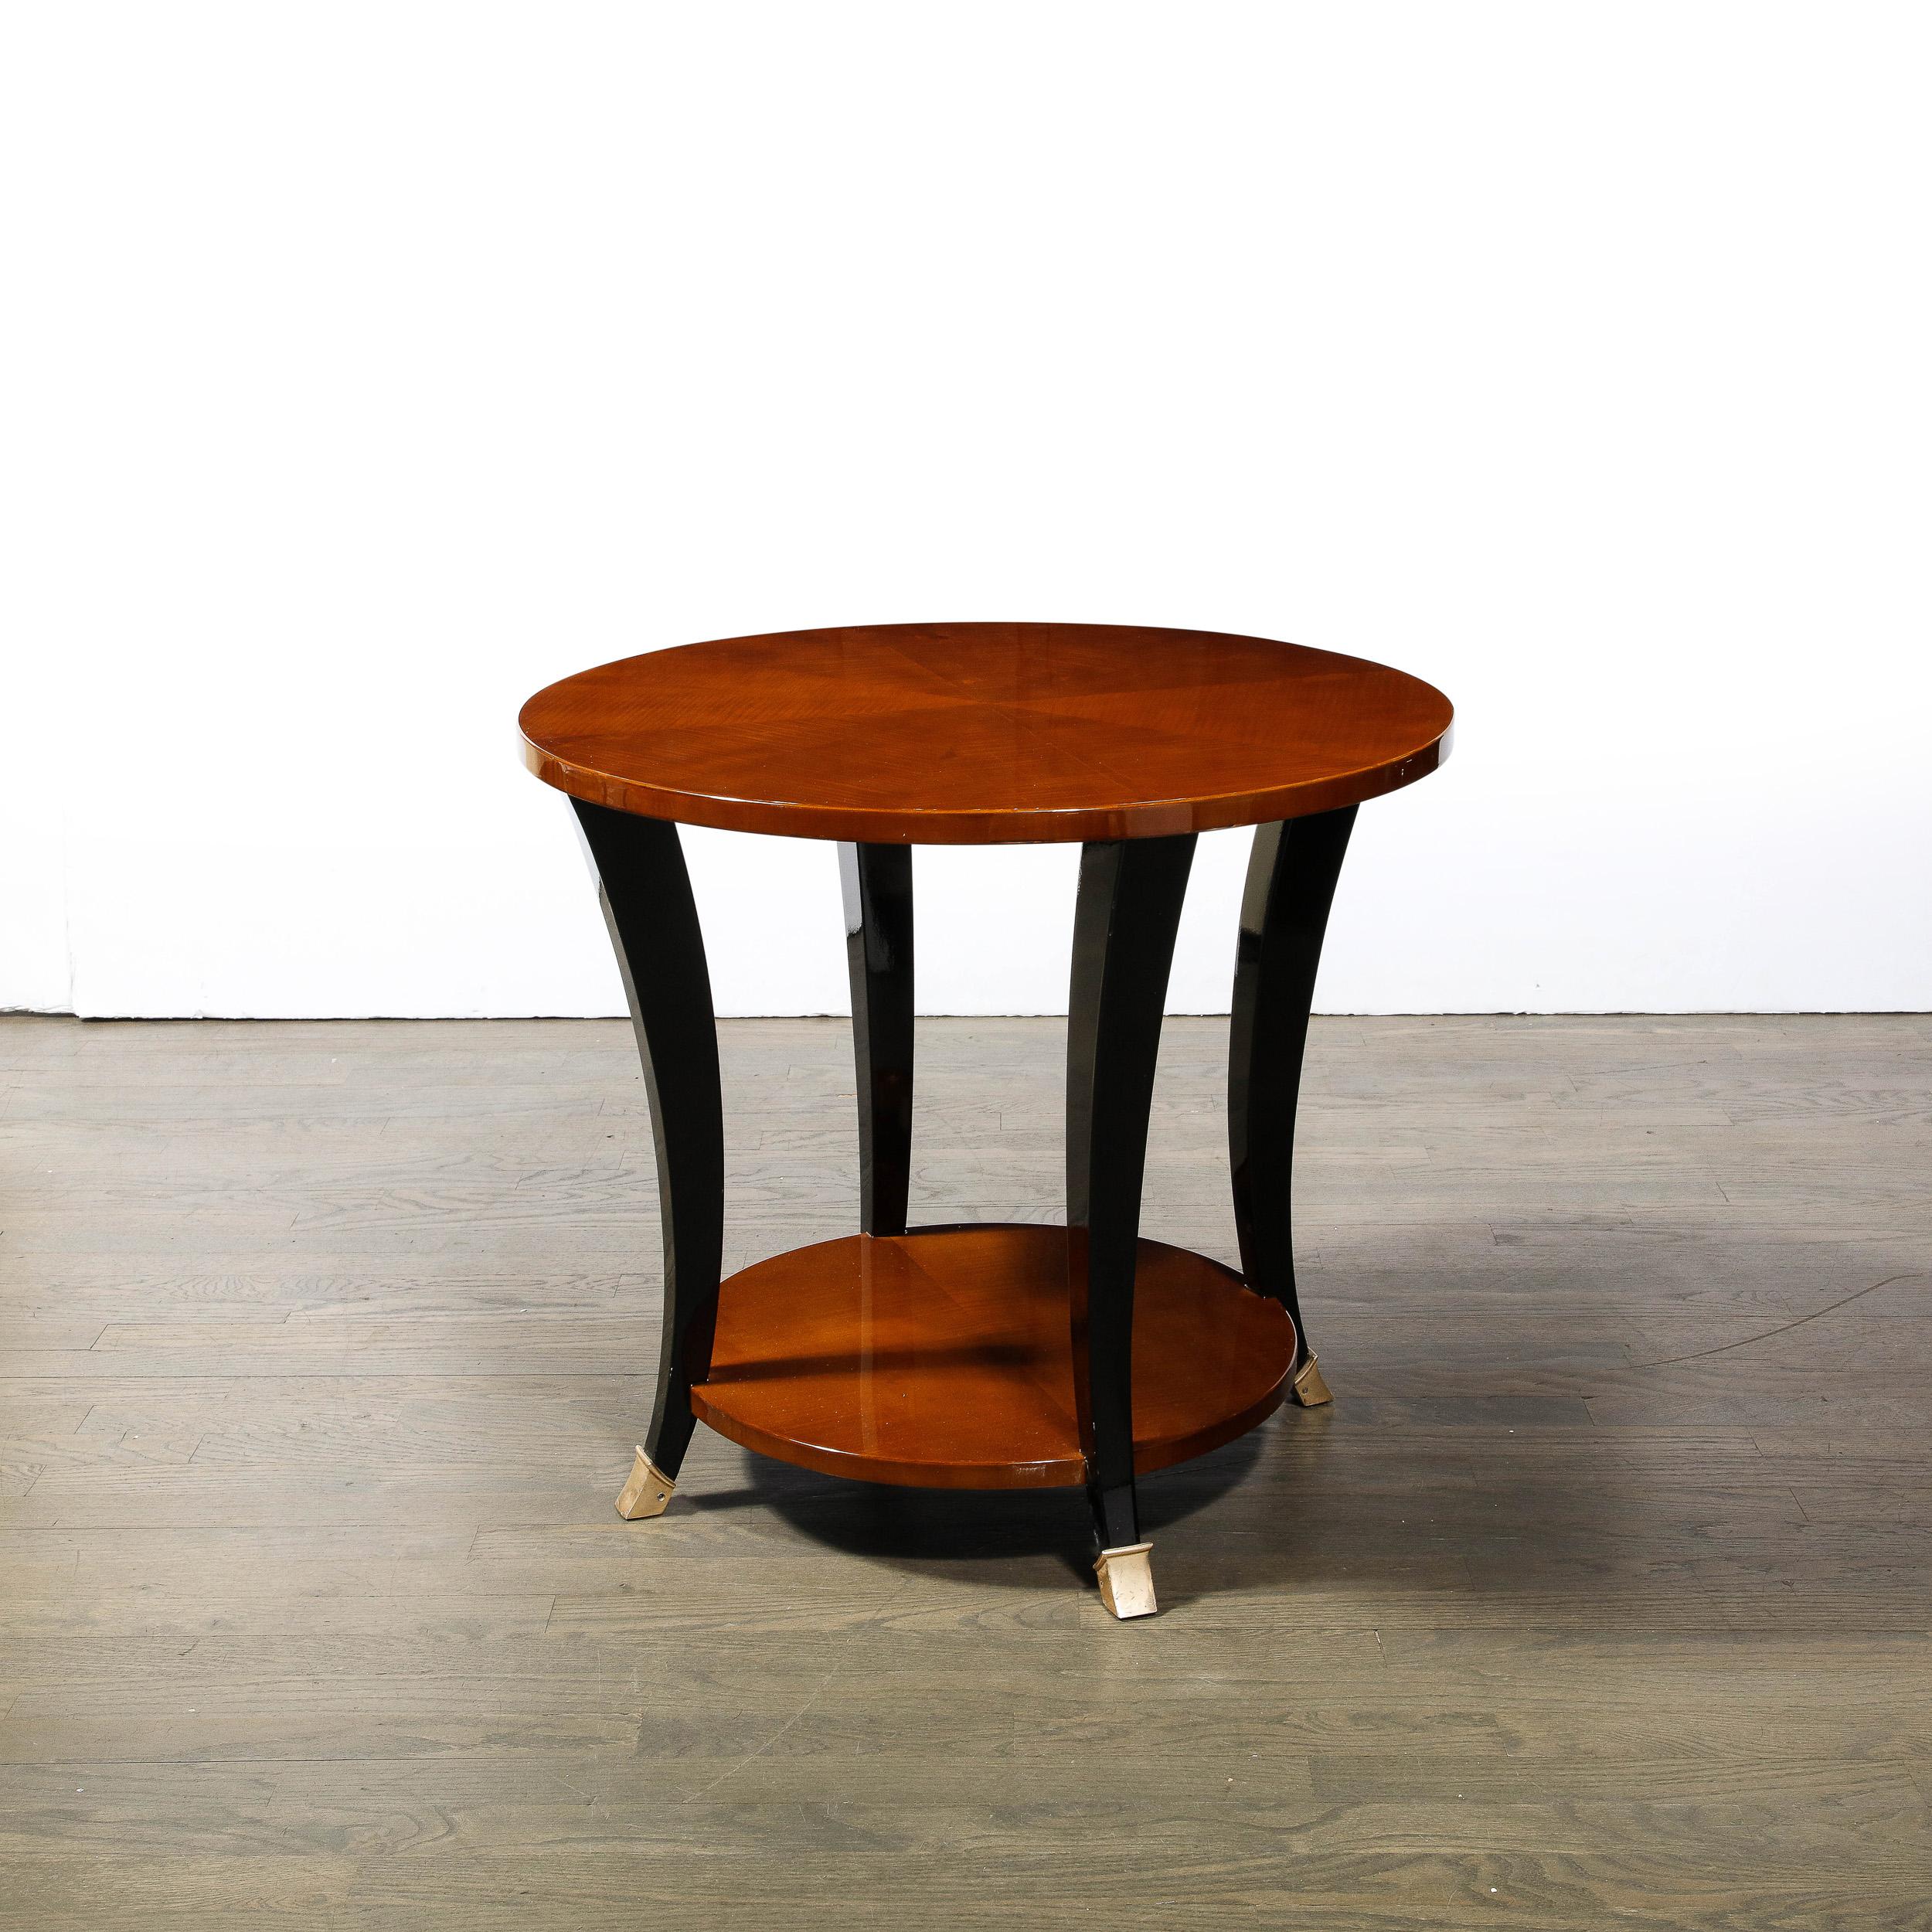 This beautiful two tier Art Deco Machine Age Gueridon table was realized in France circa 1935. It offers two circular table tops in bookmatched walnut (showcasing the rich natural beauty of the woodgrain) connected by streamlined subtly bowed